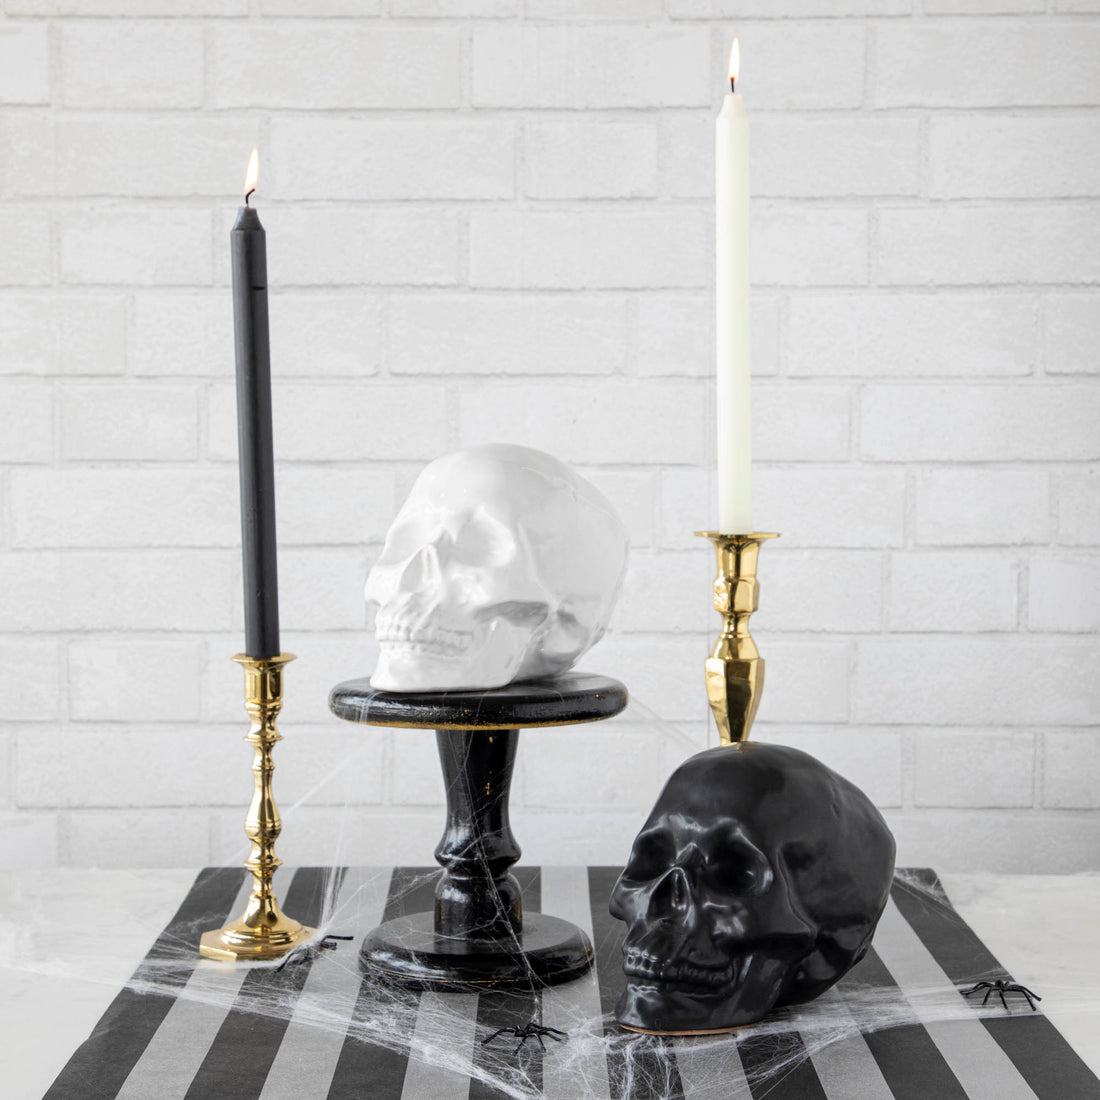 Two HomArt ceramic Skull Heads on a striped tablecloth flanked by lit candles in brass holders against a white brick background, serving as an ominous decor piece.